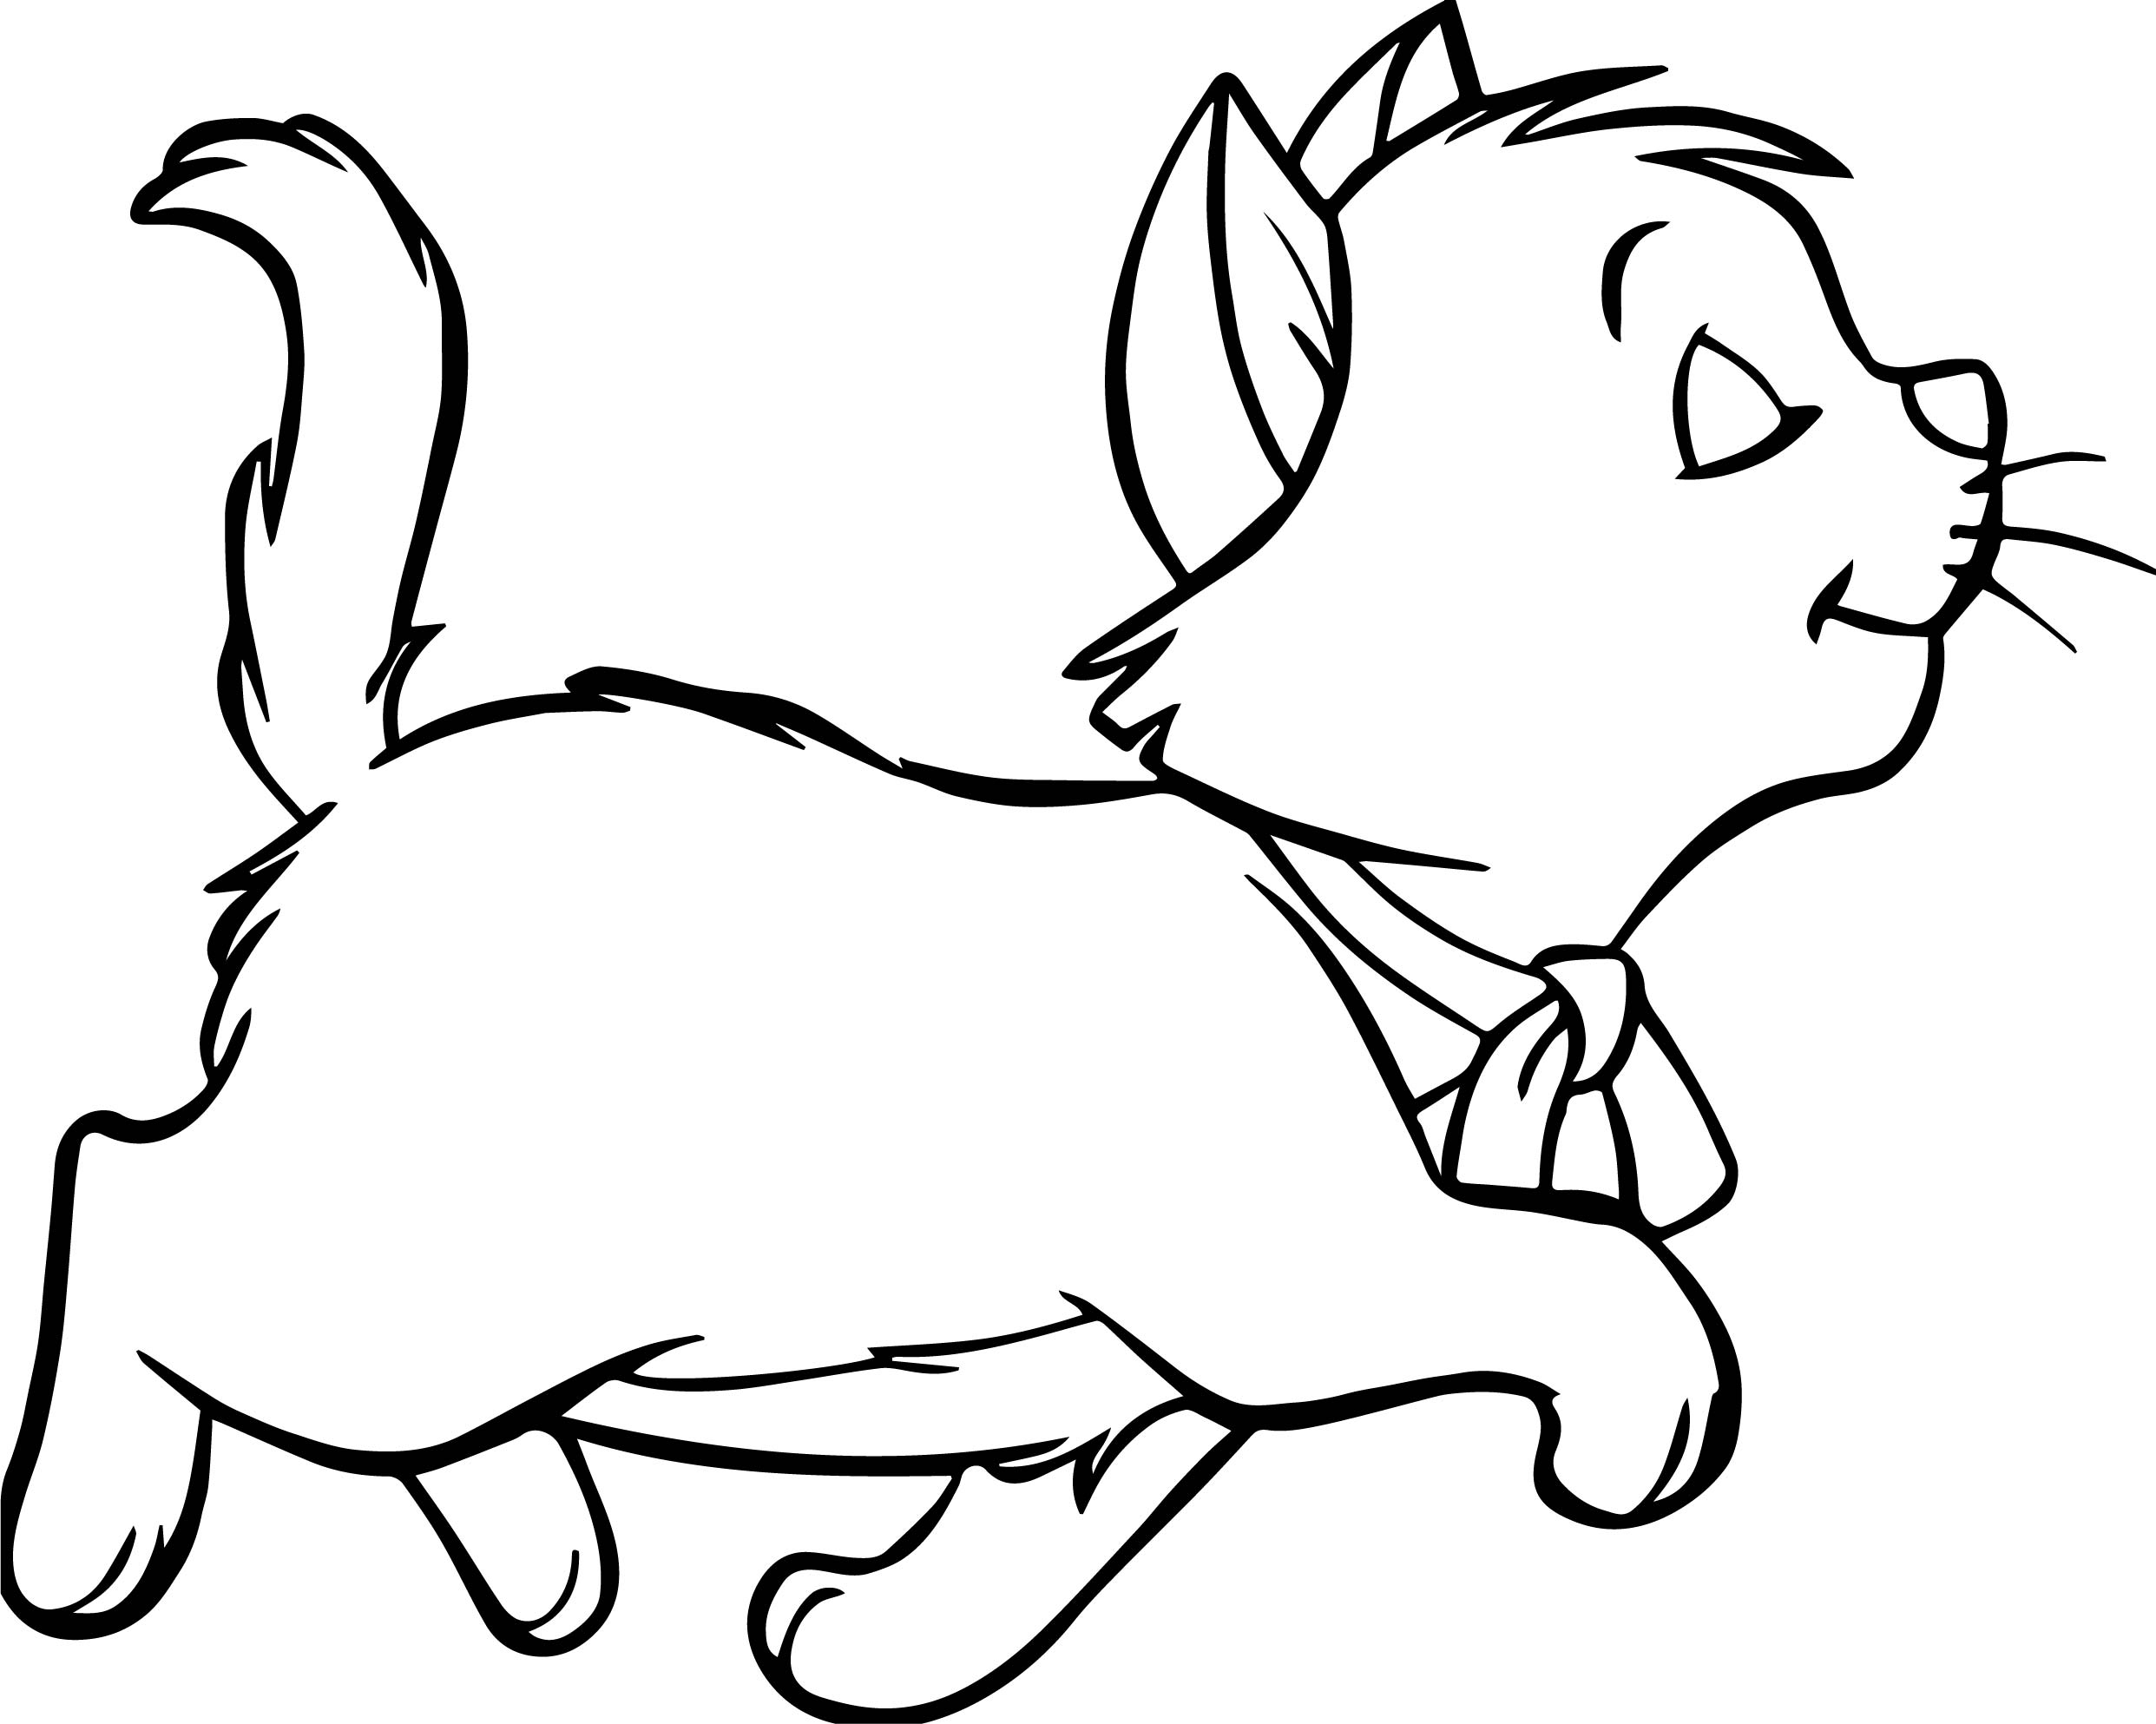 Berlioz Aristocats Coloring Pages.